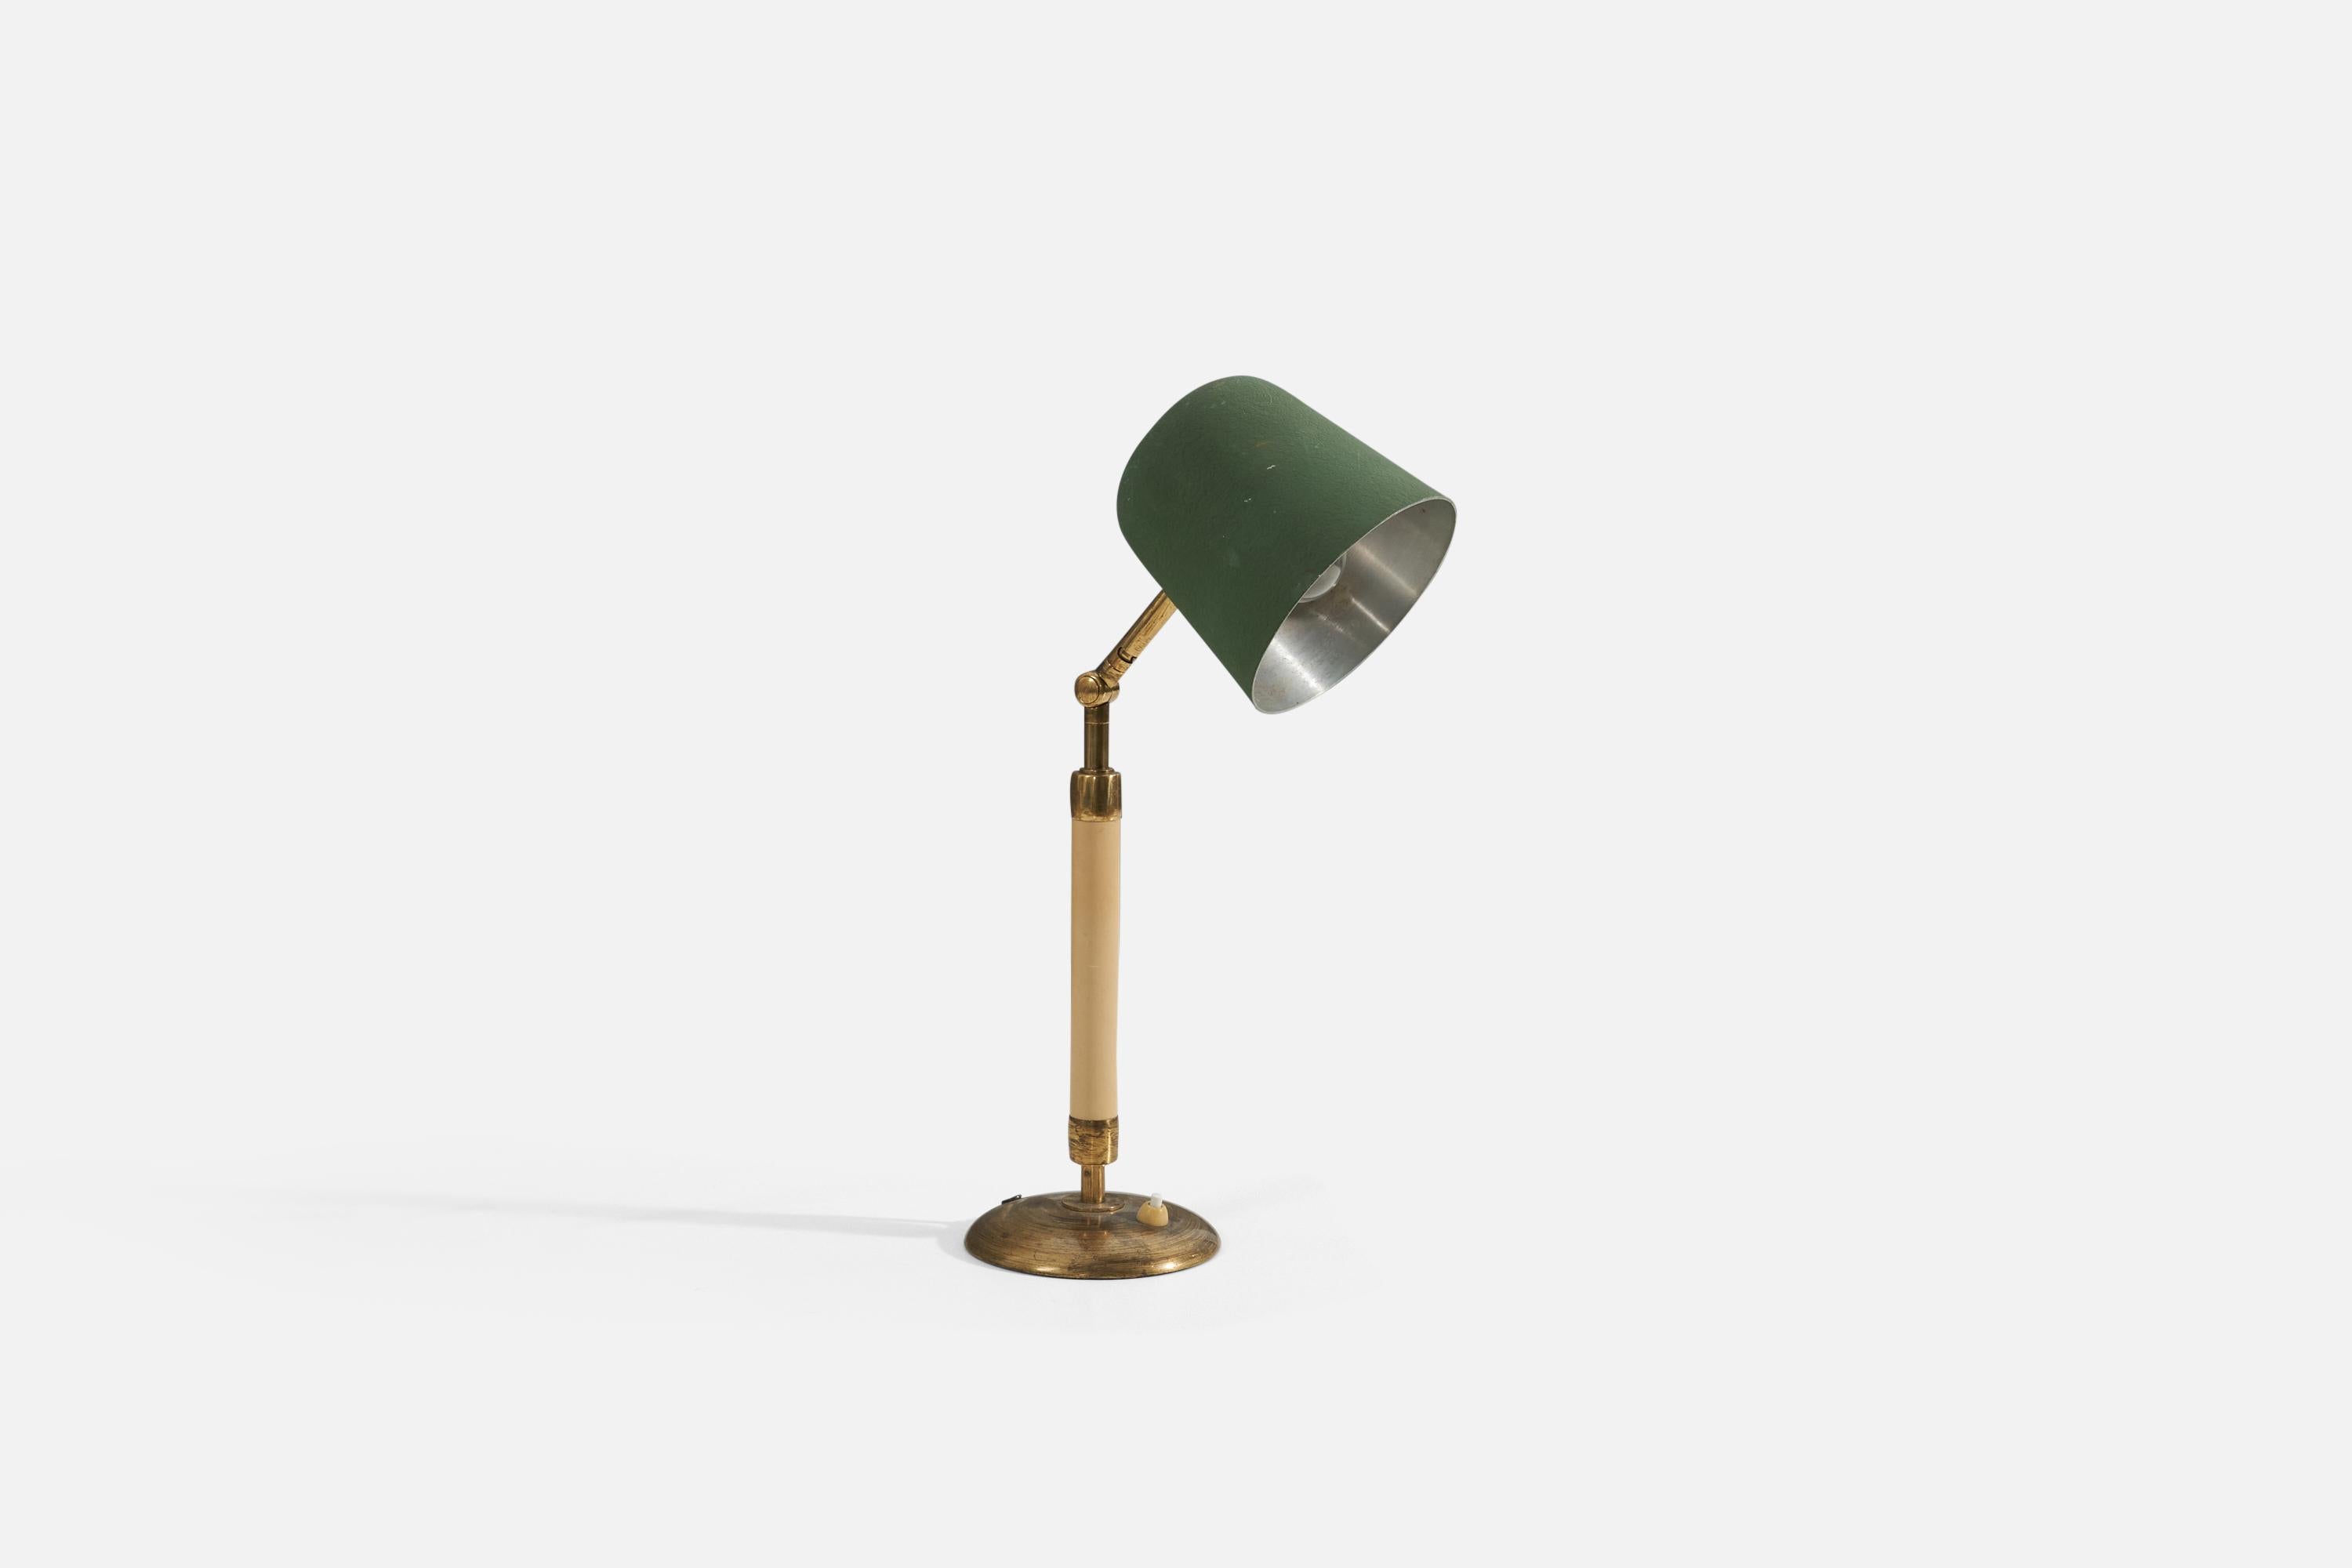 A table lamp attributed to Bertil Brisborg for Nordiska Kompaniet. Produced in Sweden, 1940s. The lamp features a brass base, bakelite stem and, green-lacquered metal shade.